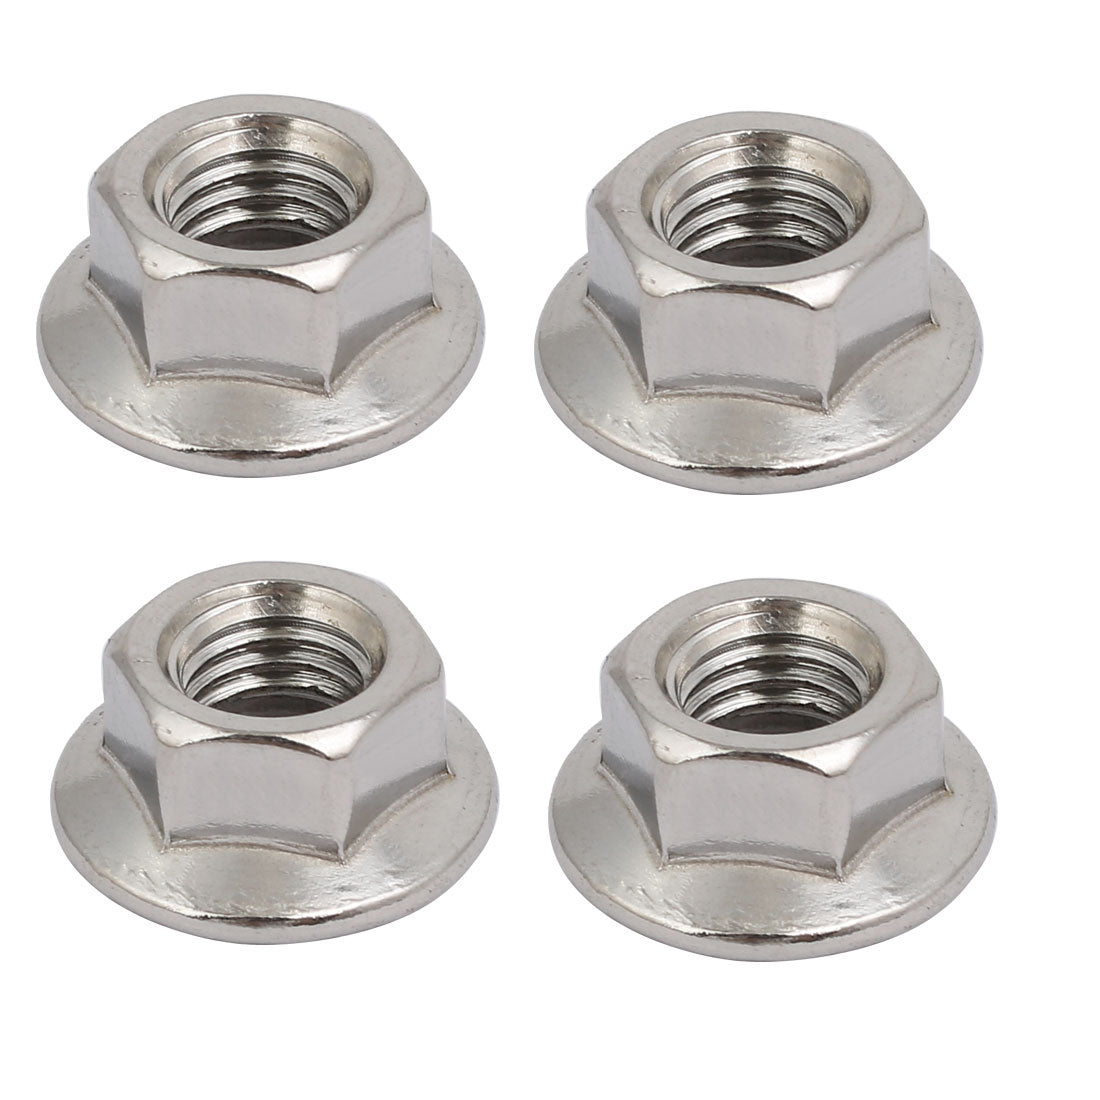 uxcell Uxcell 4pcs M12x1.75mm Pitch Metric Thread 304 Stainless Steel Left Hand Hex Flange Nut